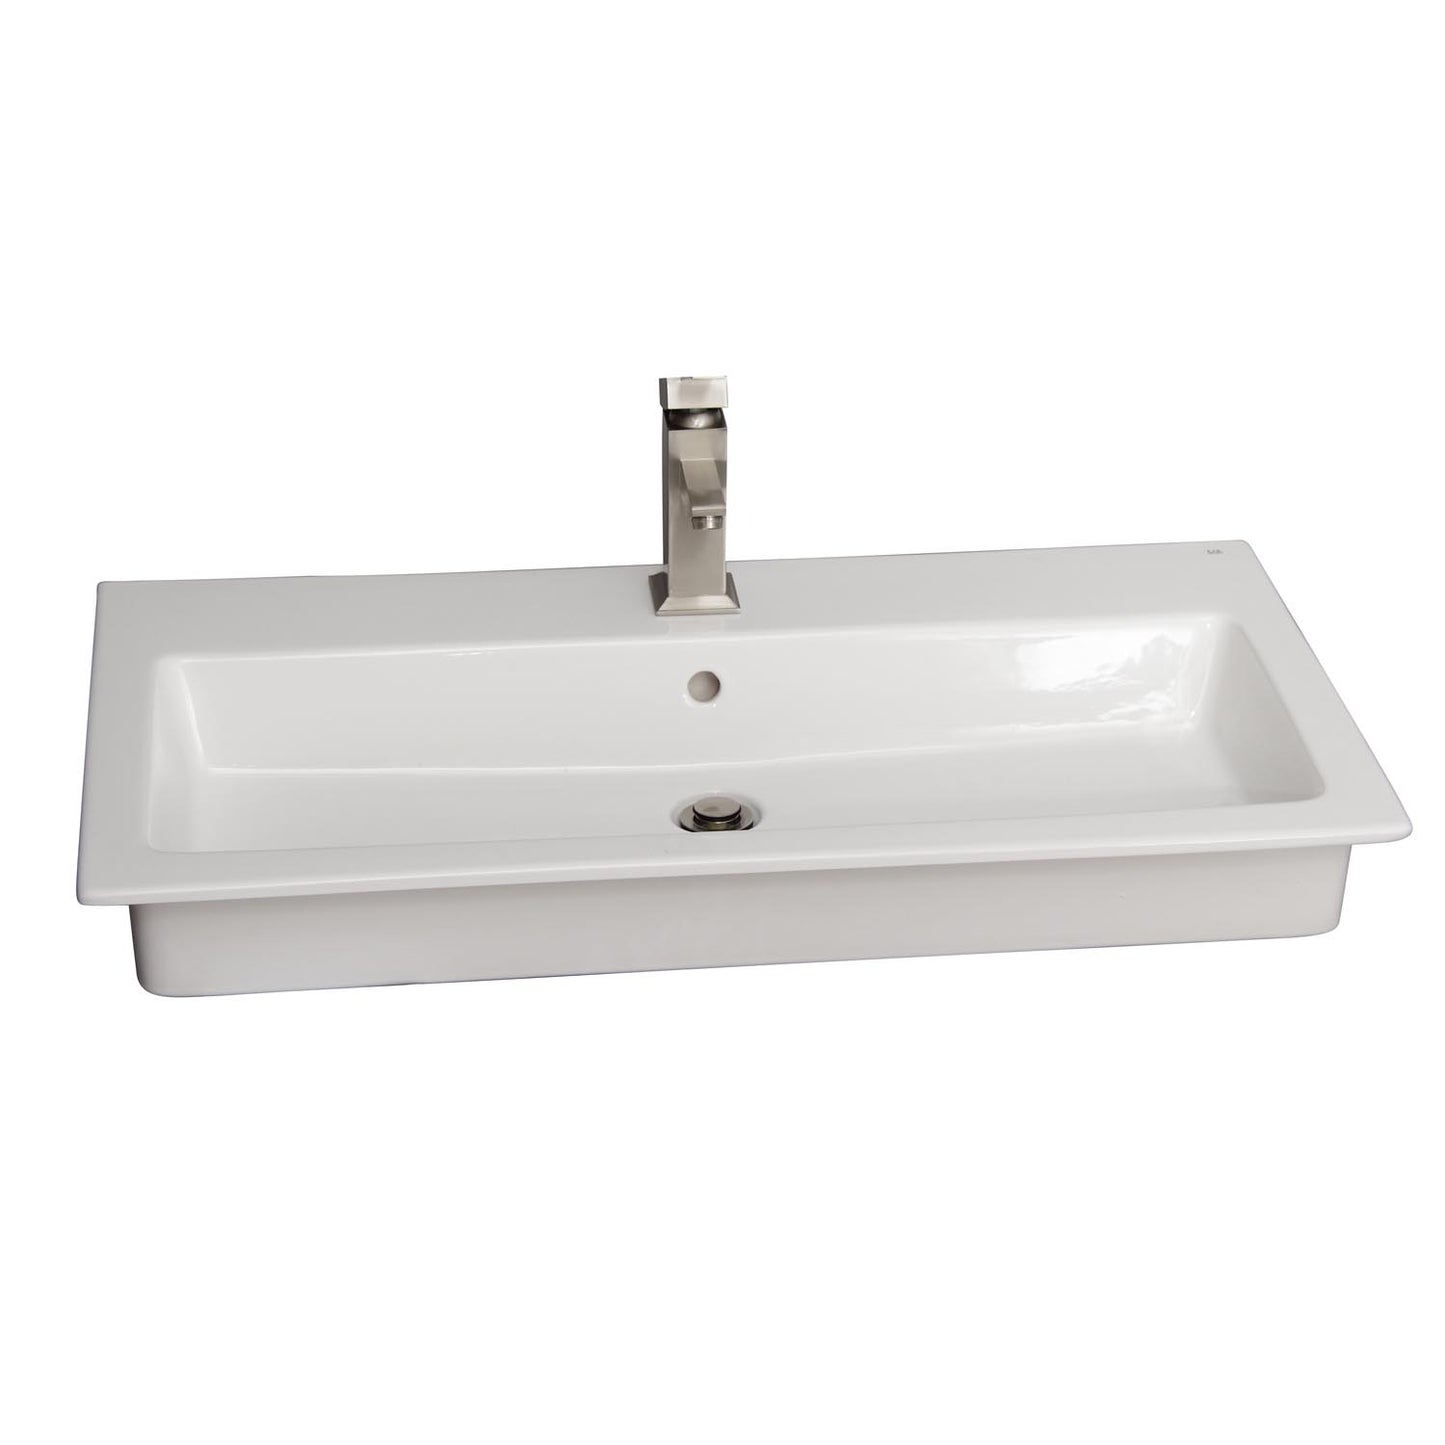 Harmony 35" Drop in Wash Basin Sink with 1 Faucet Hole White